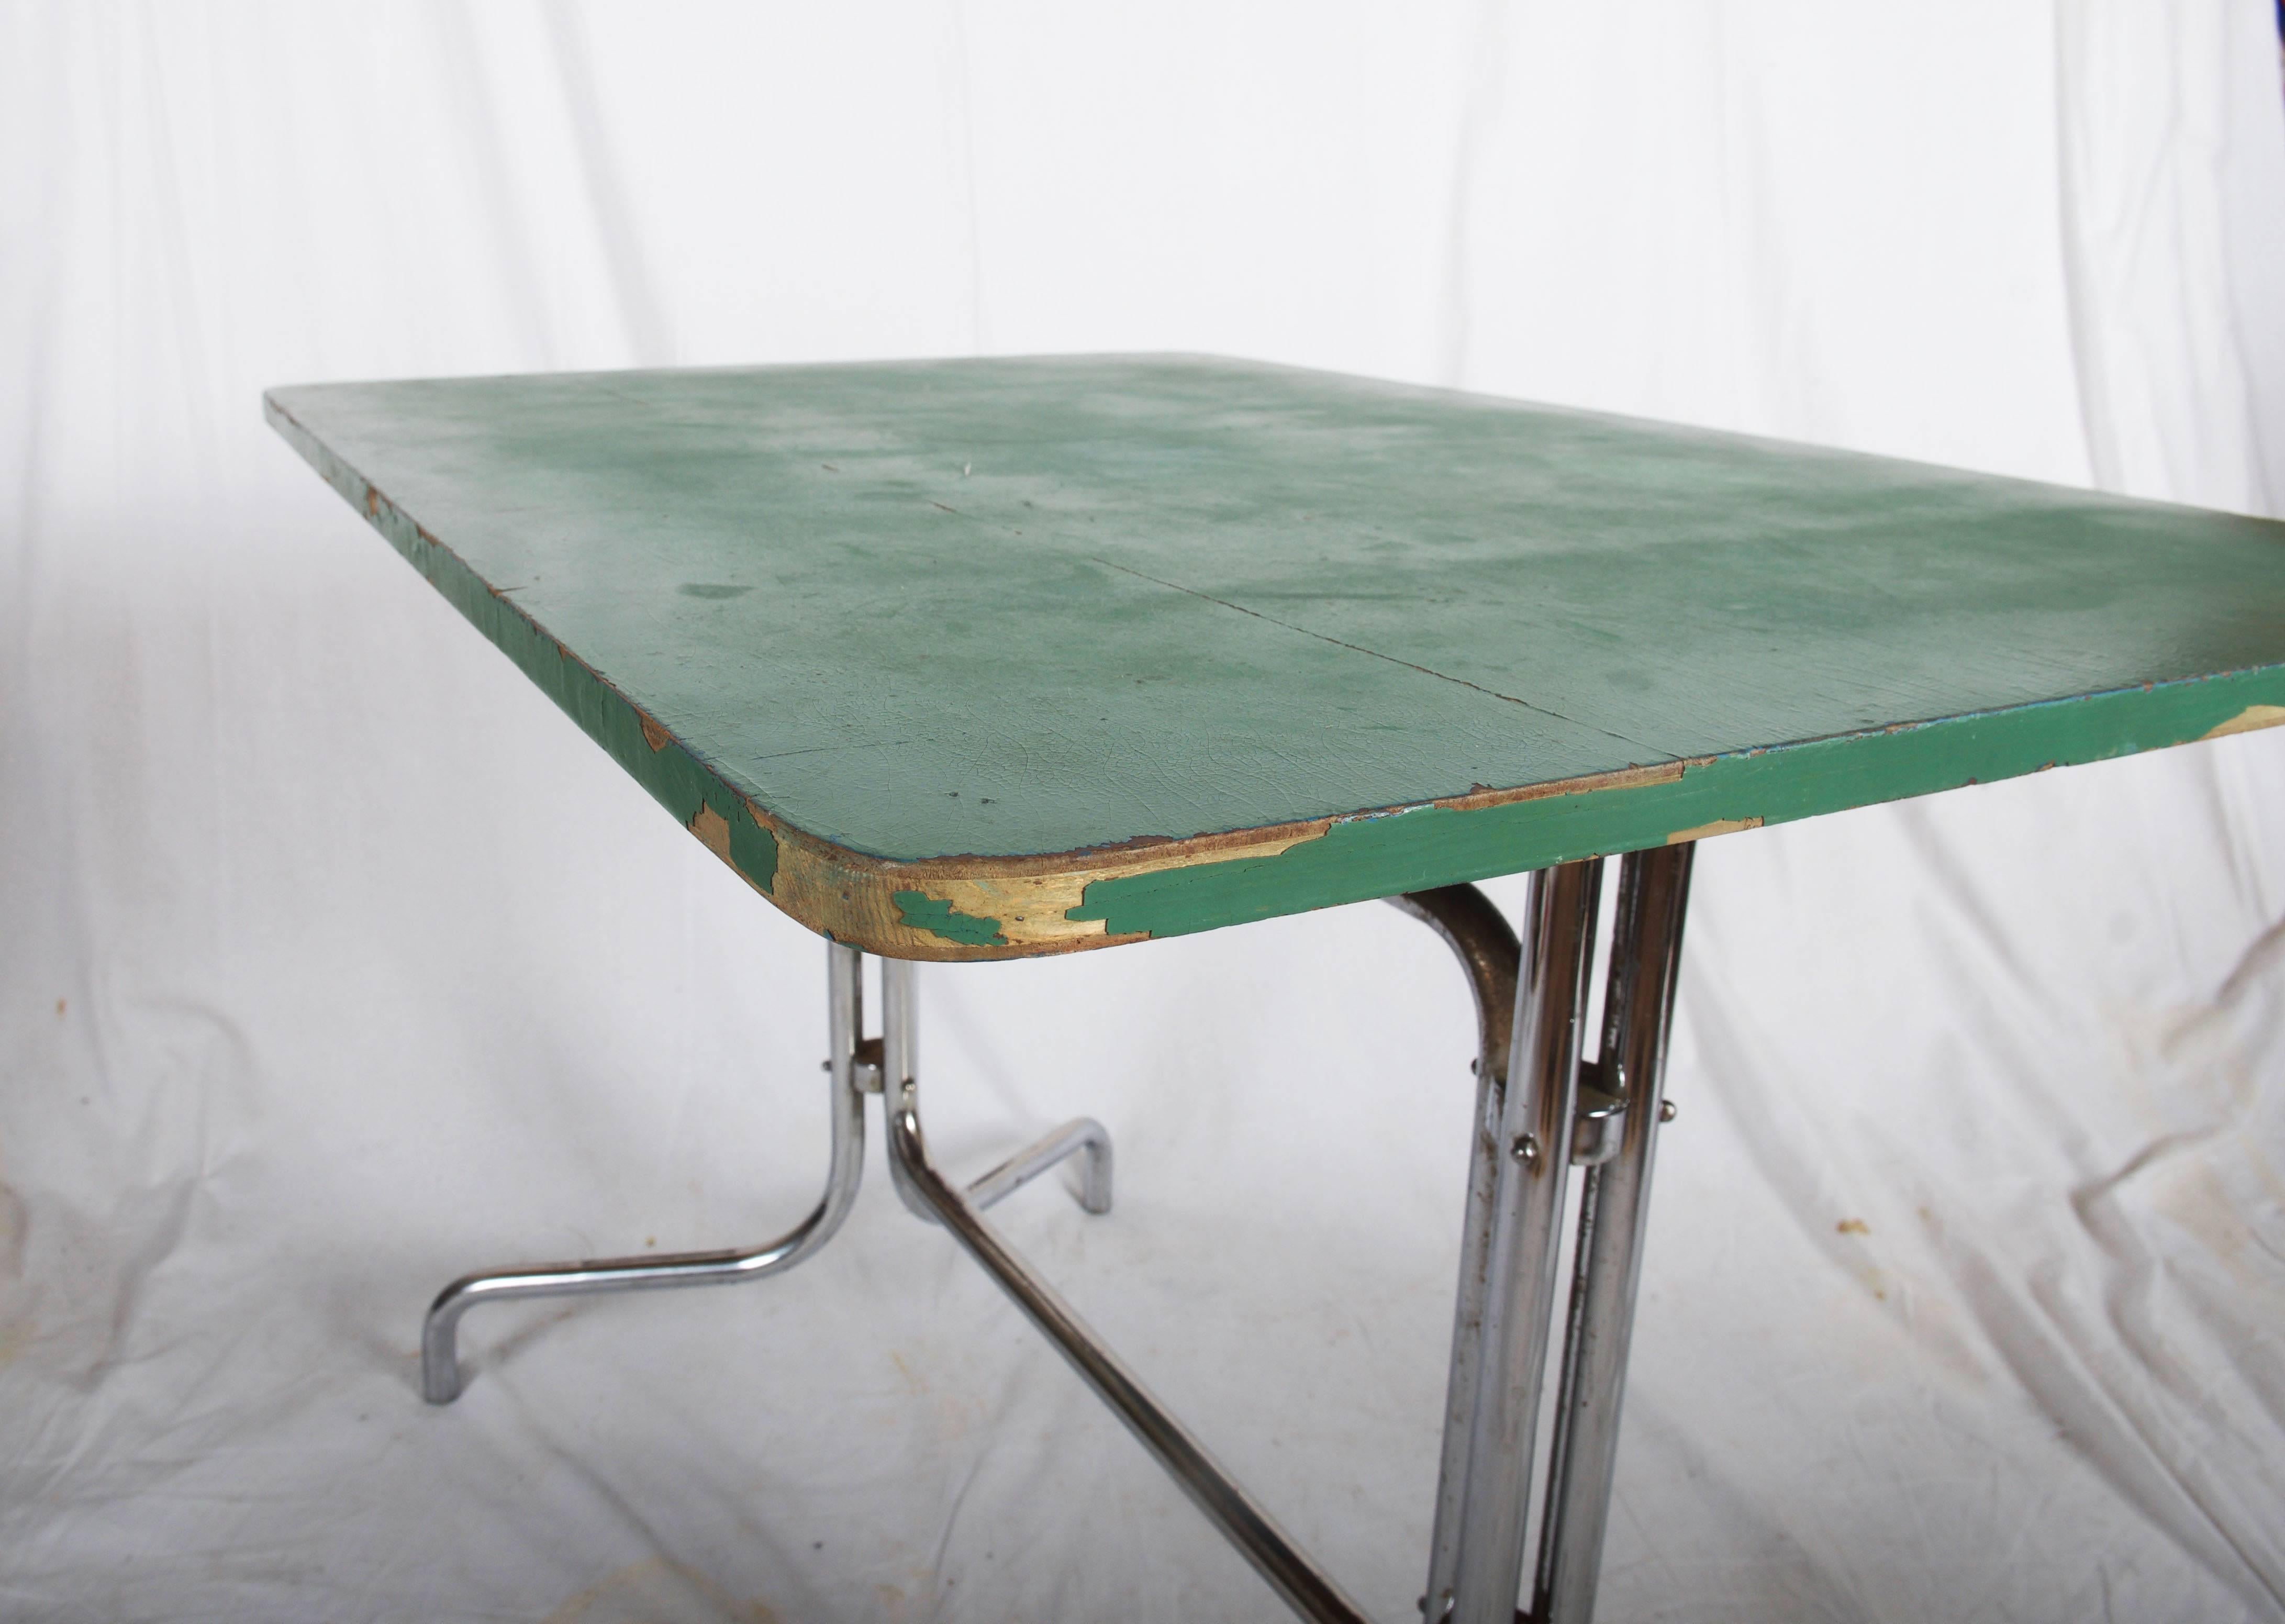 Extremely Rare Bauhaus Table by Marcel Breuer for Mücke & Melder 1